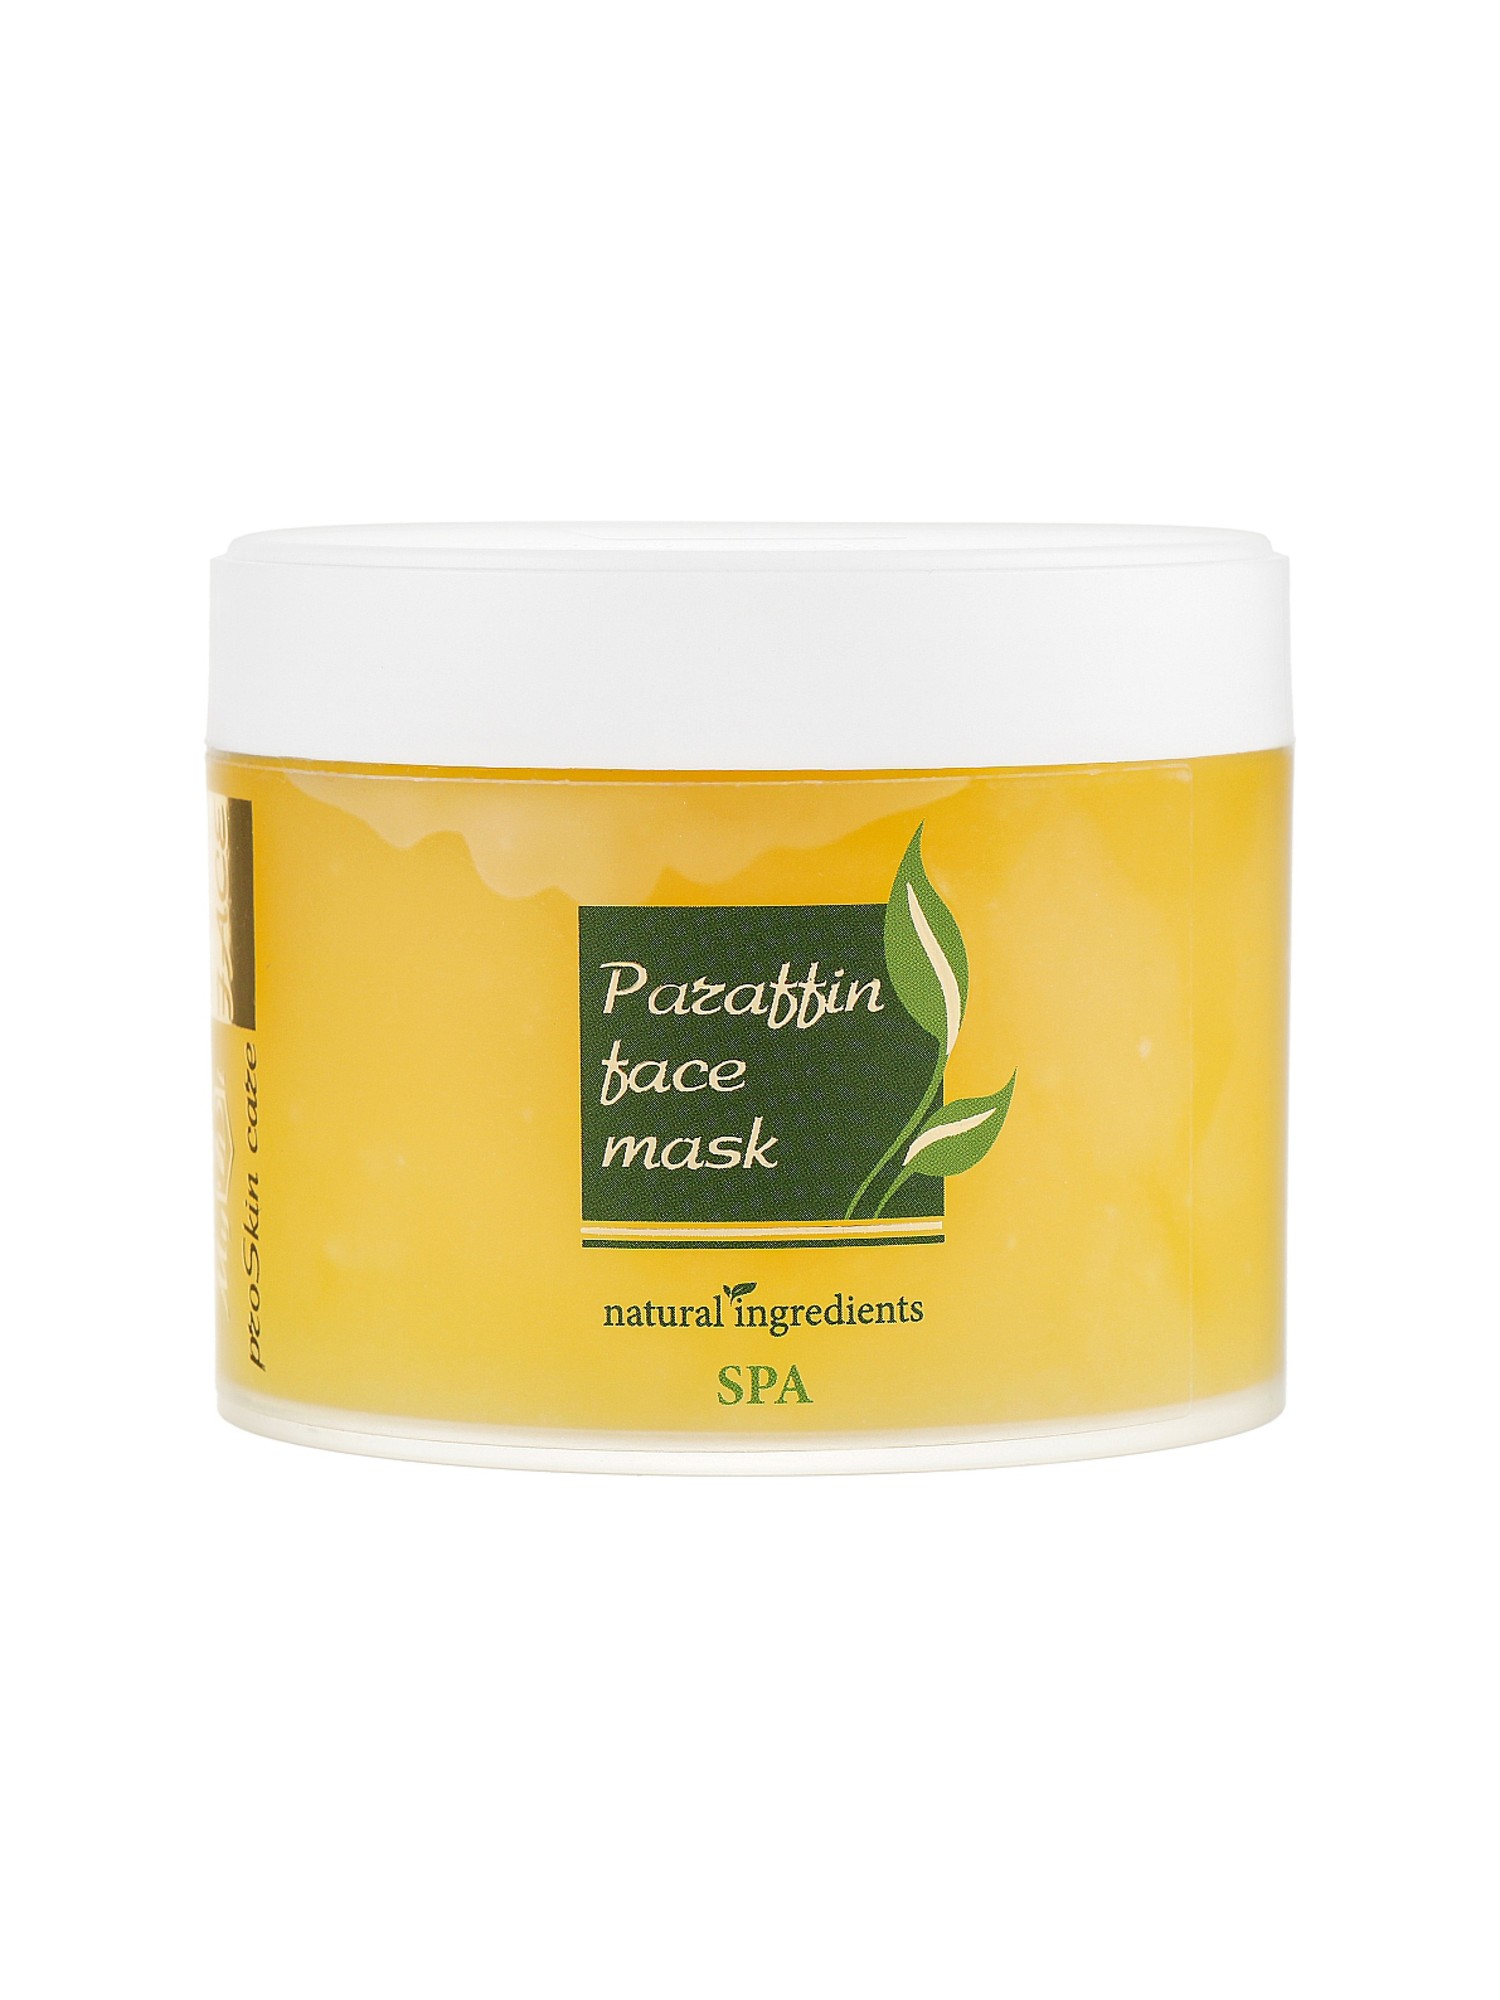 Paraffin face mask, 300 ml